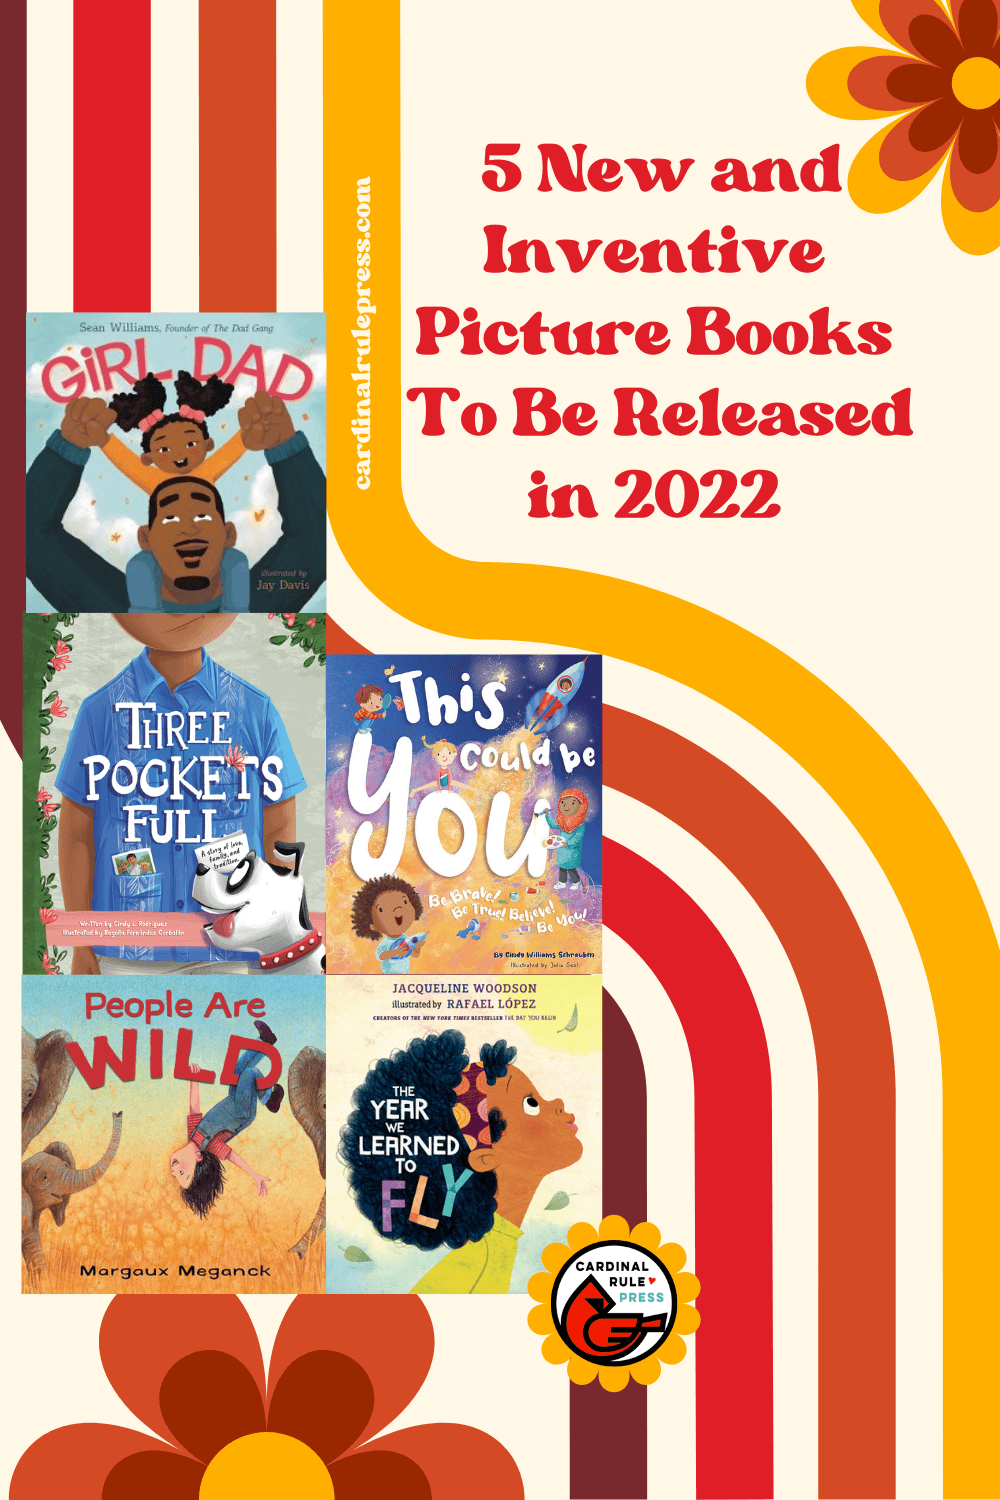 New and Inventive Picture Books To Be Released in 2022. A list of five picture books to be released in the new year!
#PictureBooks #ChildrensBooks #NewReleases